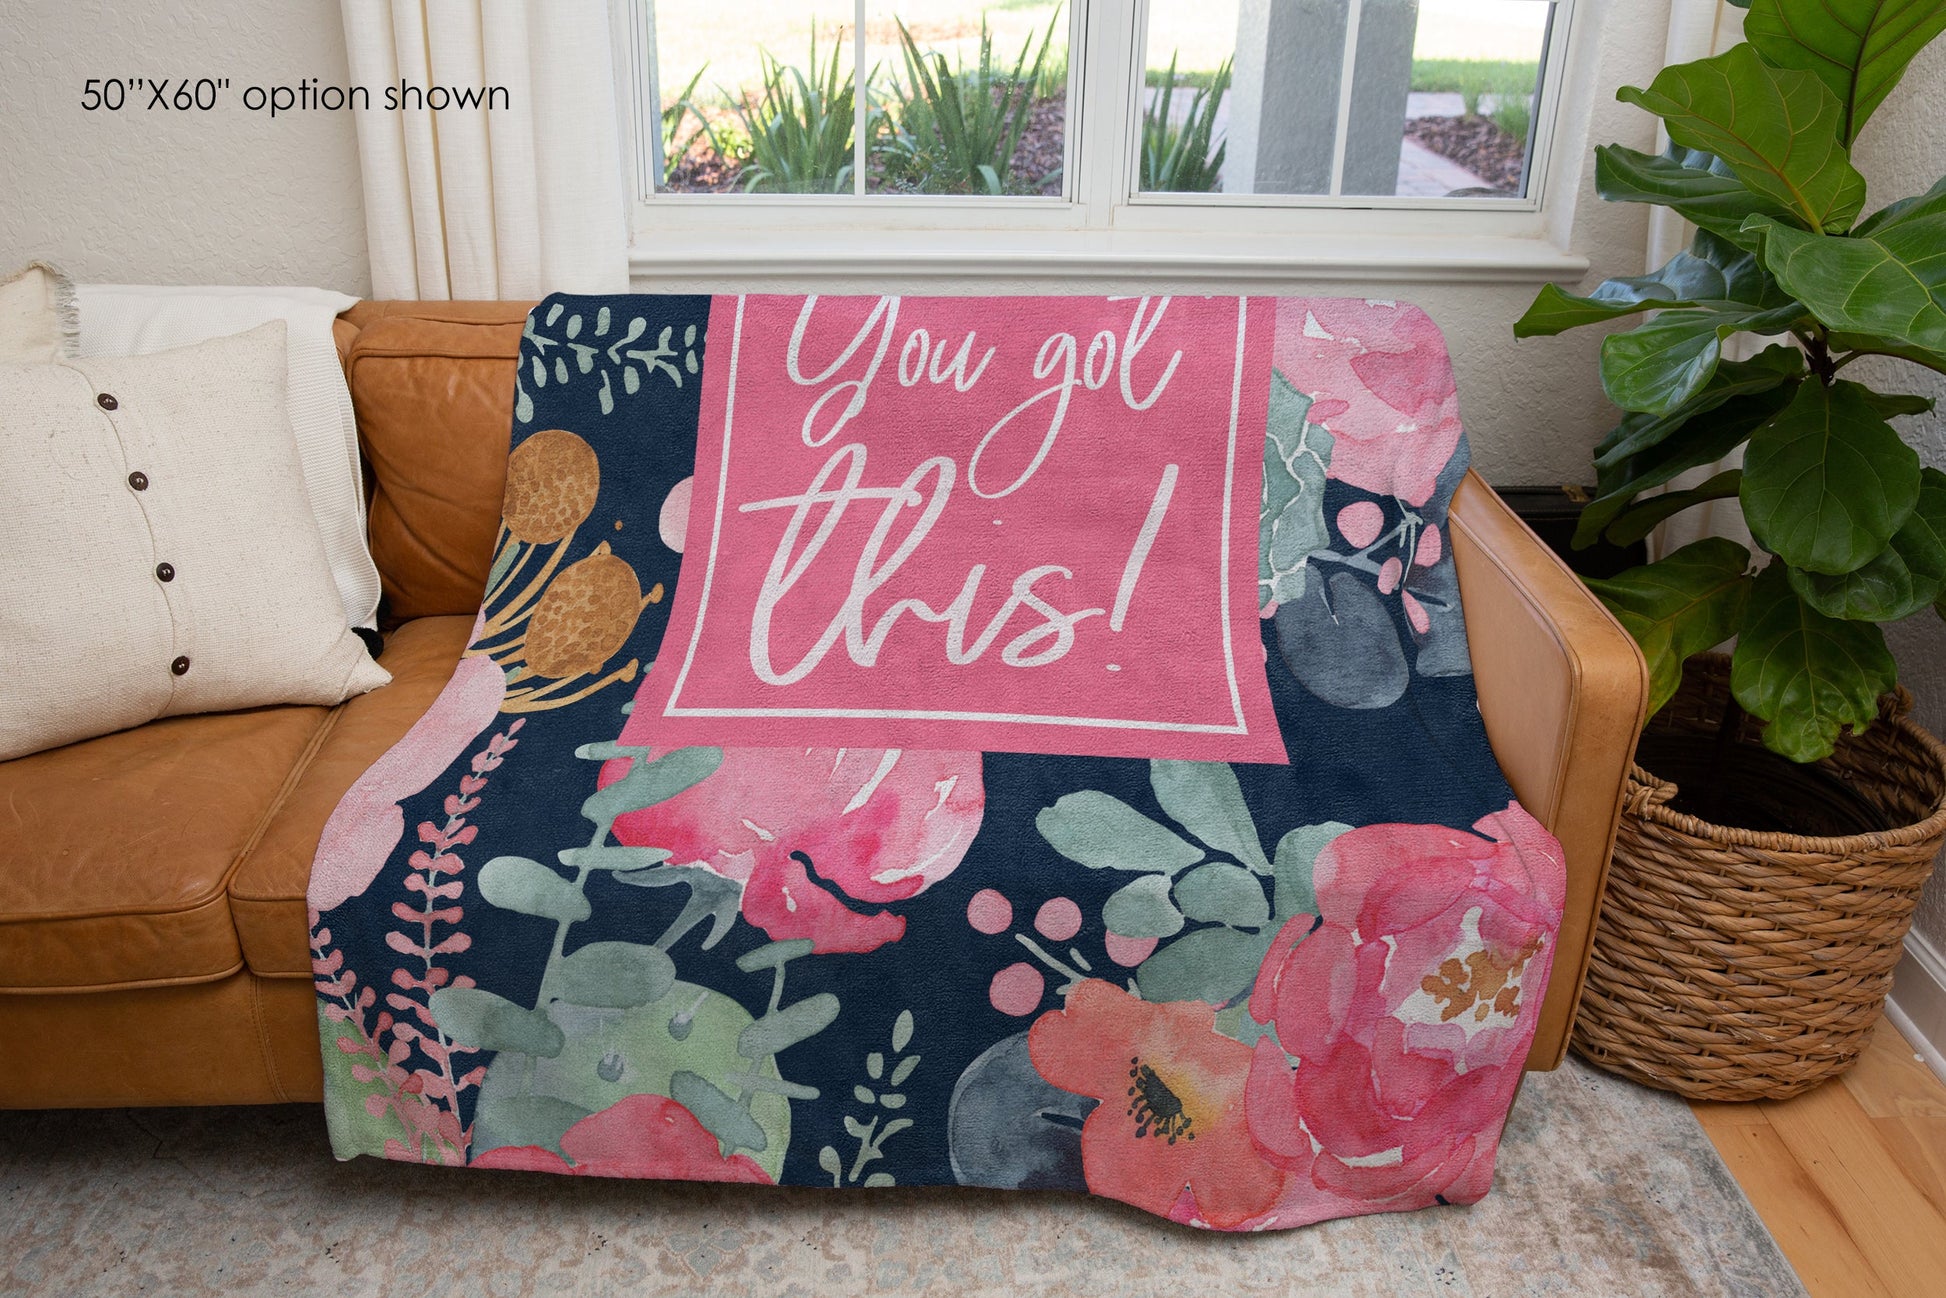 You Got This Positive Affirmations Blanket-Luxe Palette